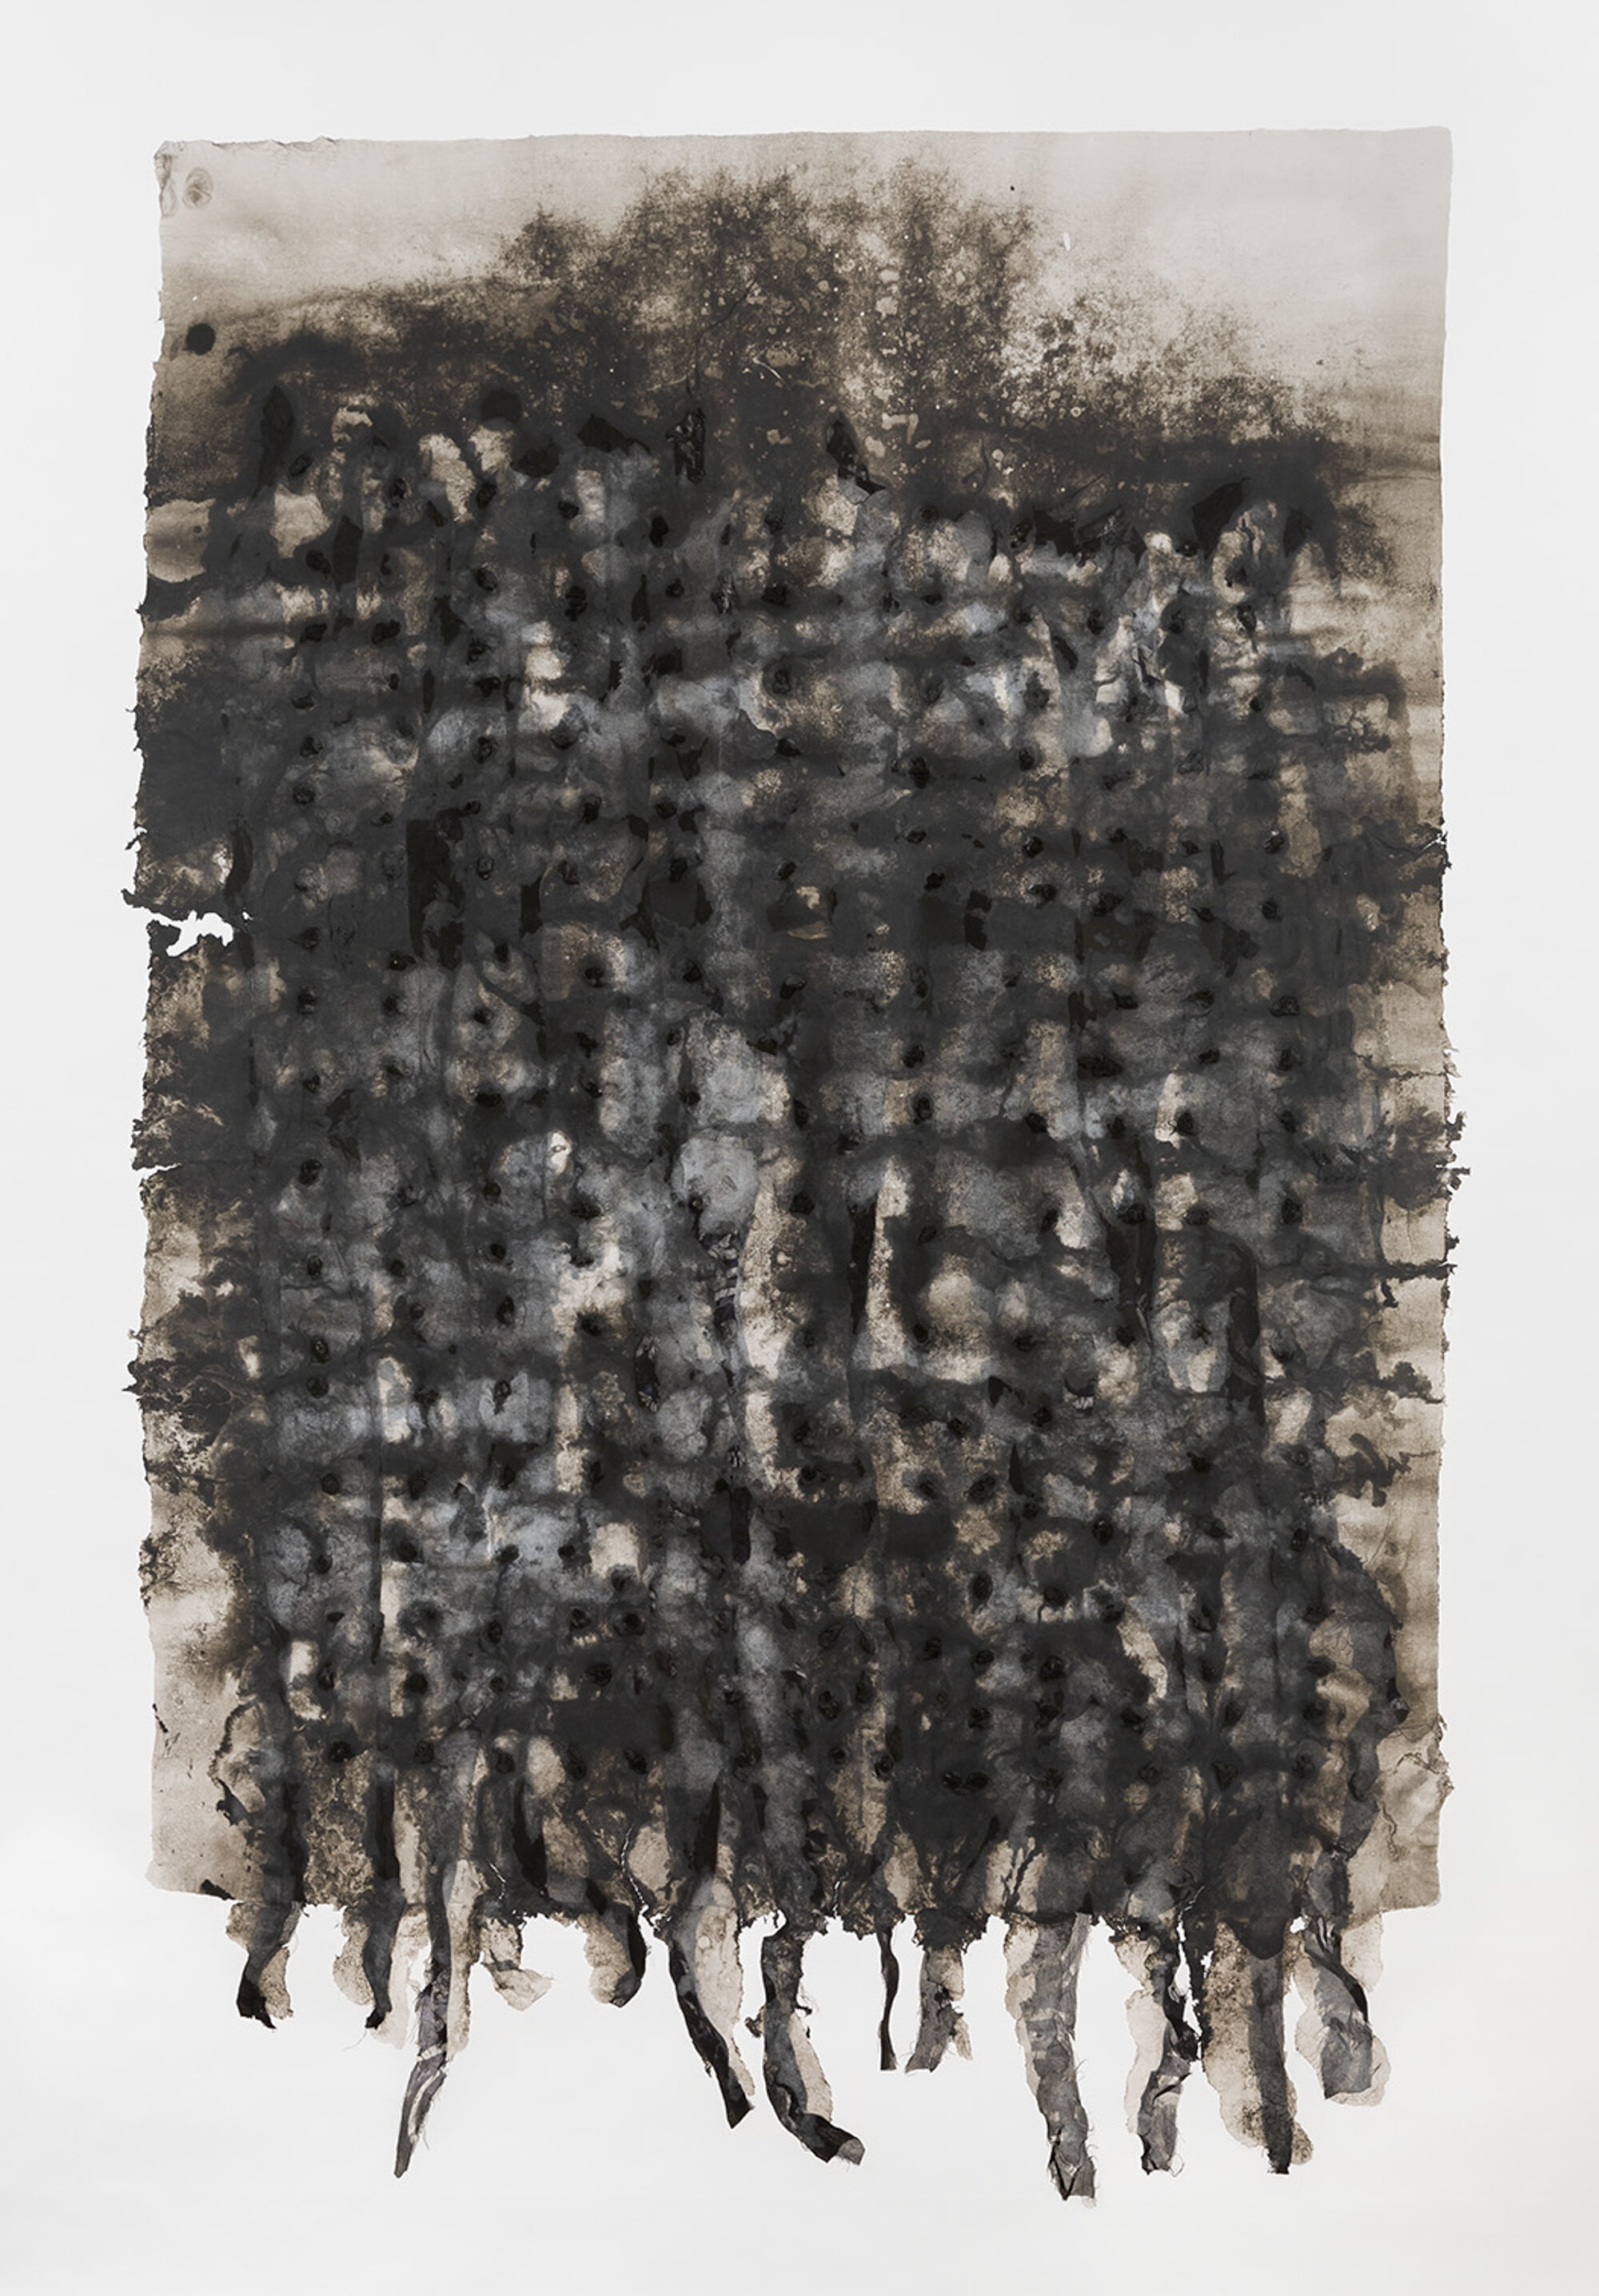   Untitled , 2015 Pigment, fabric, thread, pulp, and linen handmade paper 34 x 22 in. 